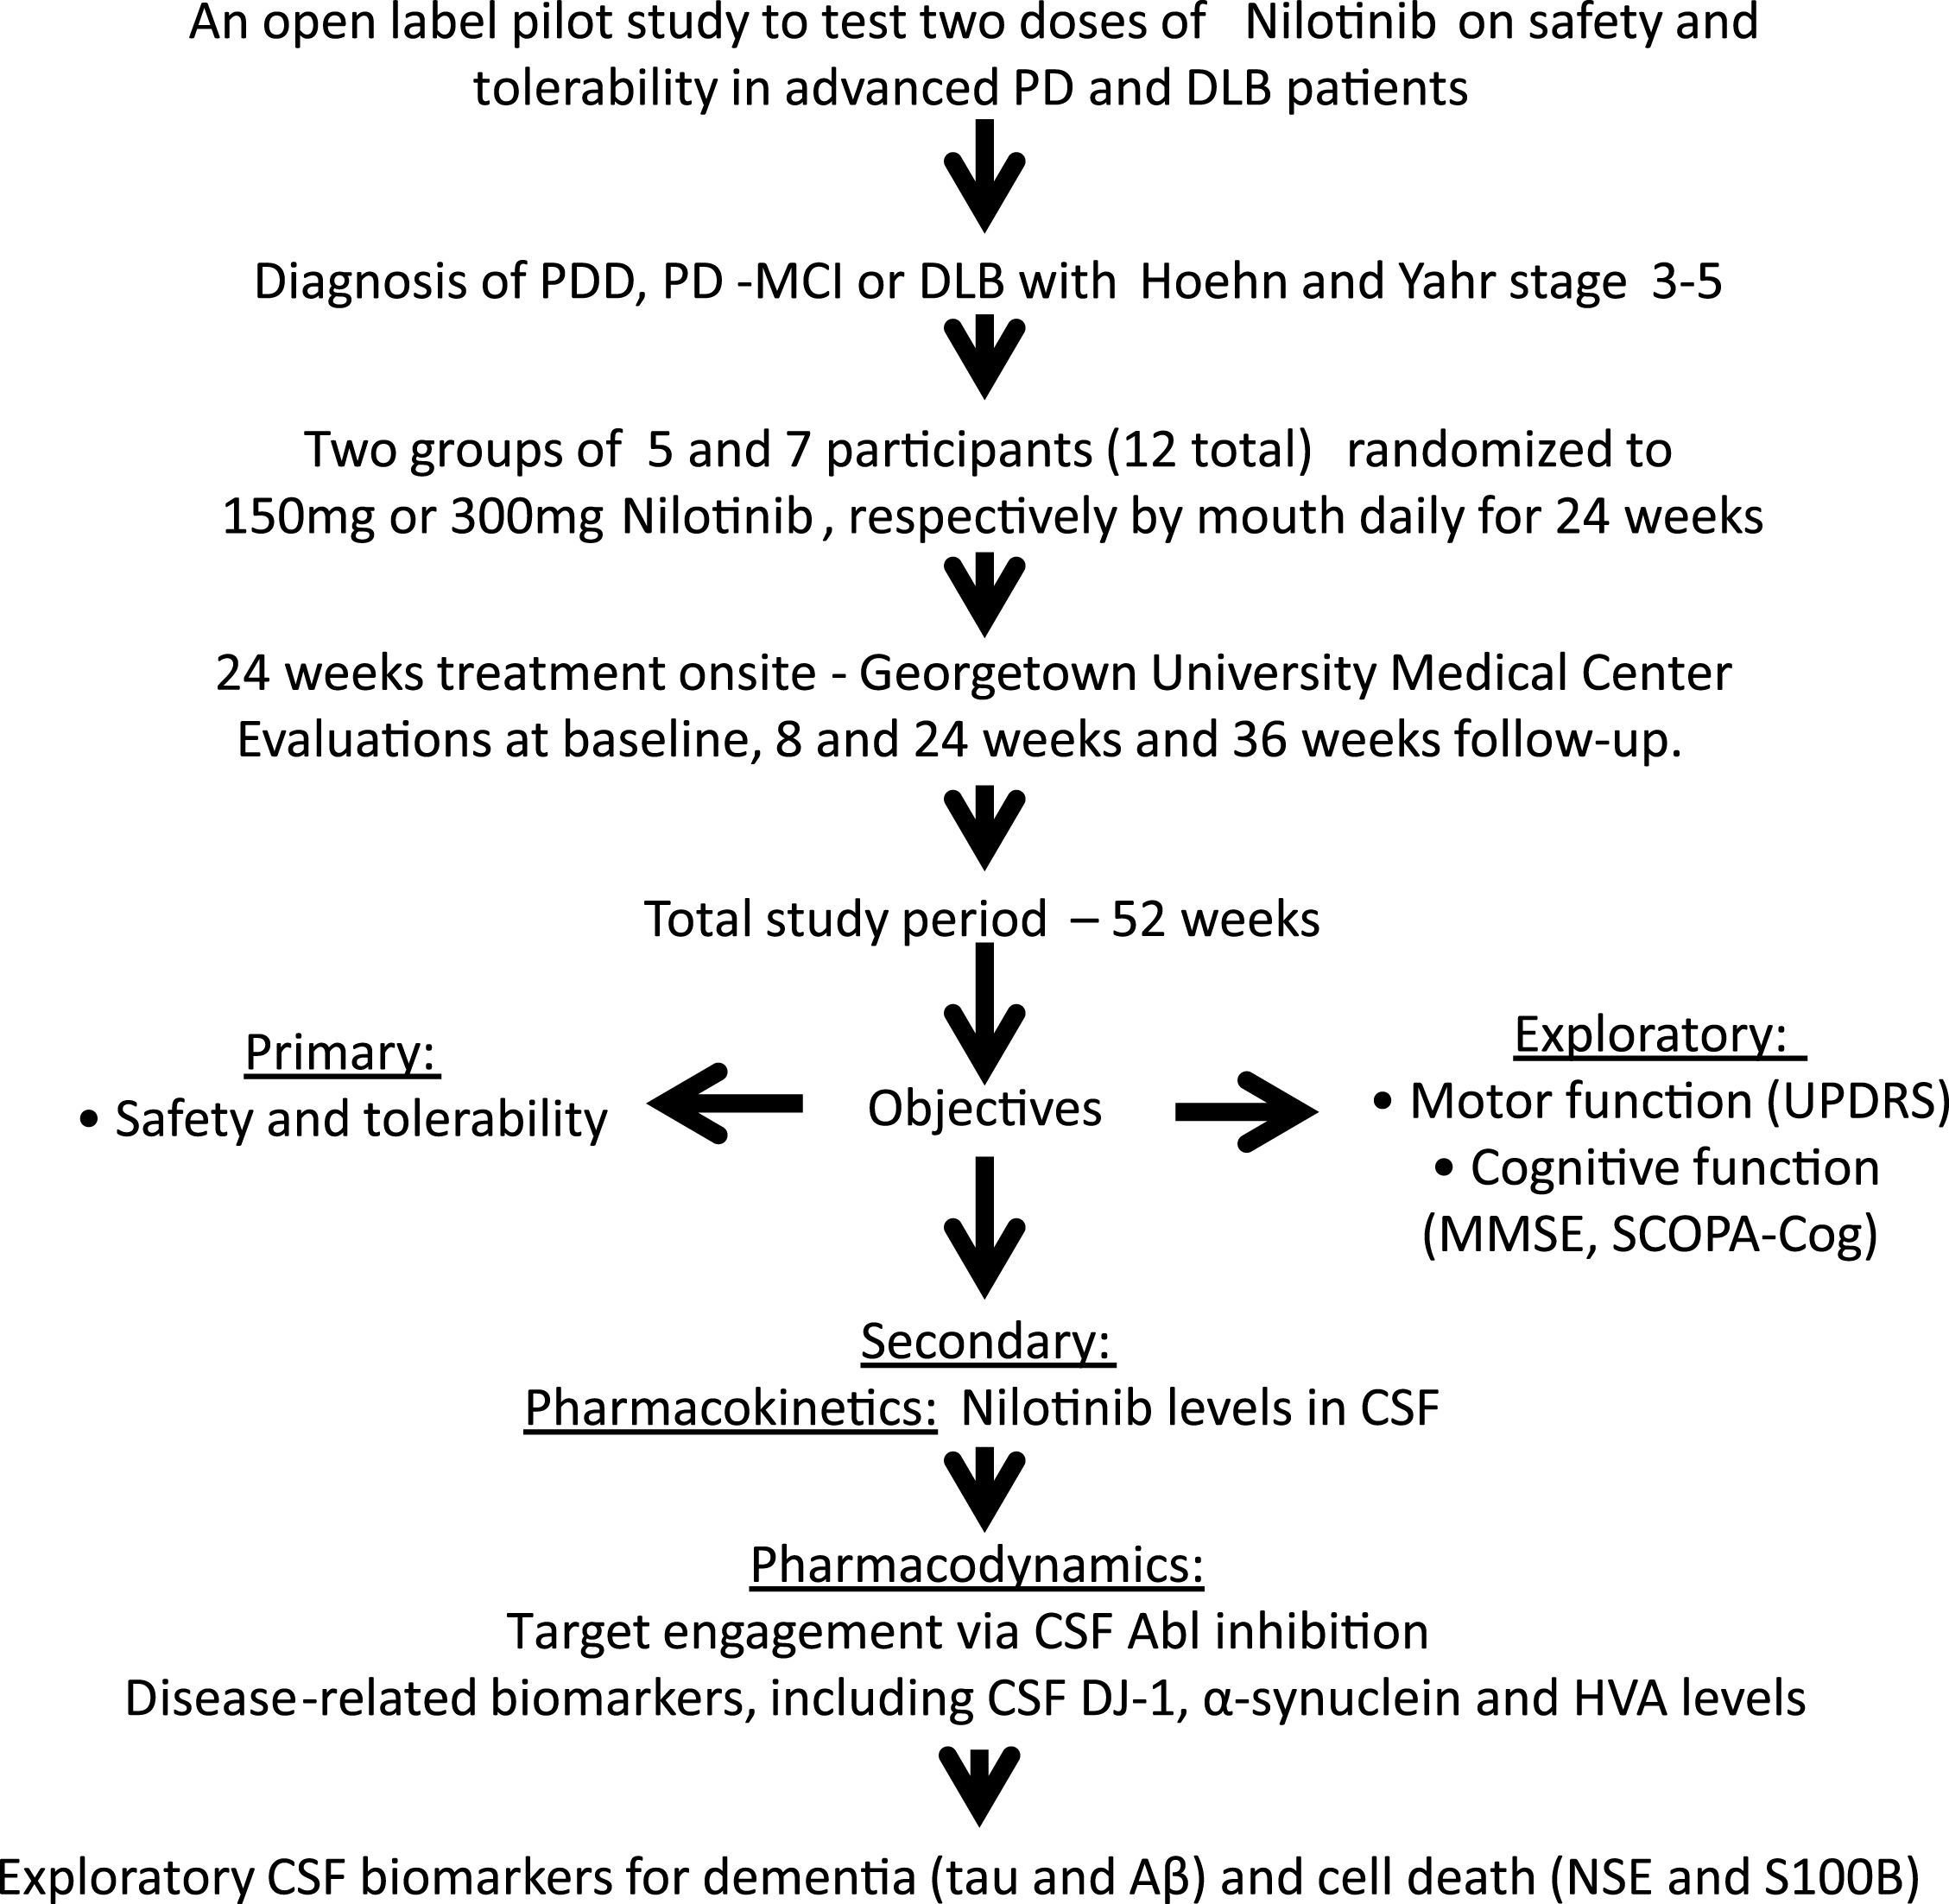 Design and milestones of an open-label, phase I clinical trial to evaluate the safety and efficacy of 150 mg and 300 mg Nilotinib for 24 weeks in patients with Parkinson’s disease (PD) with dementia (PDD) or PD with mild cognitive impairment (PD-MCI) or dementia with Lewy bodies (DLB). Cerebrospinal fluid (CSF), Mini Mental State Examination (MMSE), Abelson (Abl), homovanillic acid (HVA), β-amyloid (Aβ), Scales for Outcomes in Parkinson’s Disease-Cognition (SCOPA-Cog), Neuron Specific Enolase (SNE).